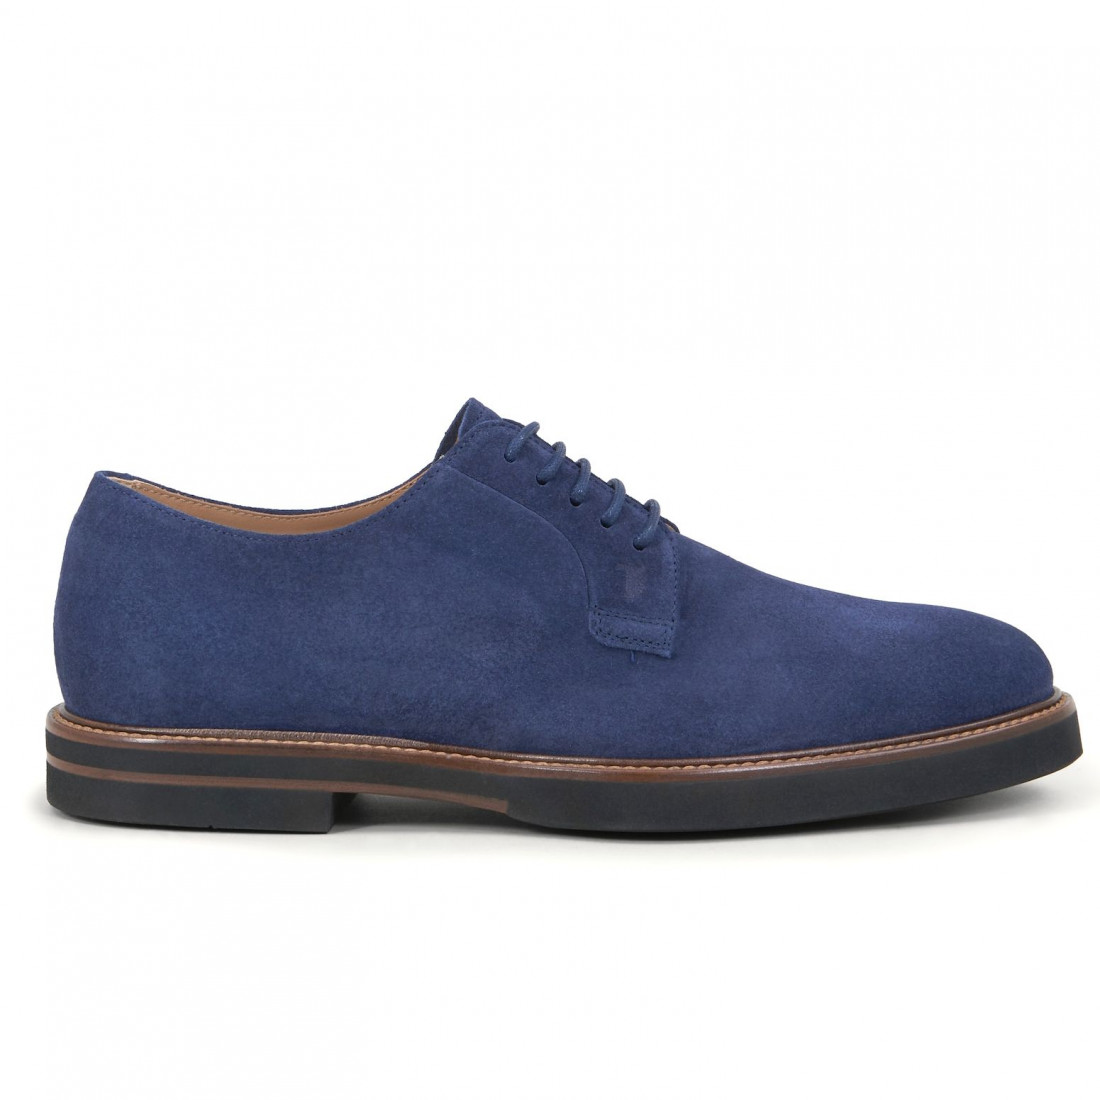 Men's Tod's Derby shoes in blue soft suede